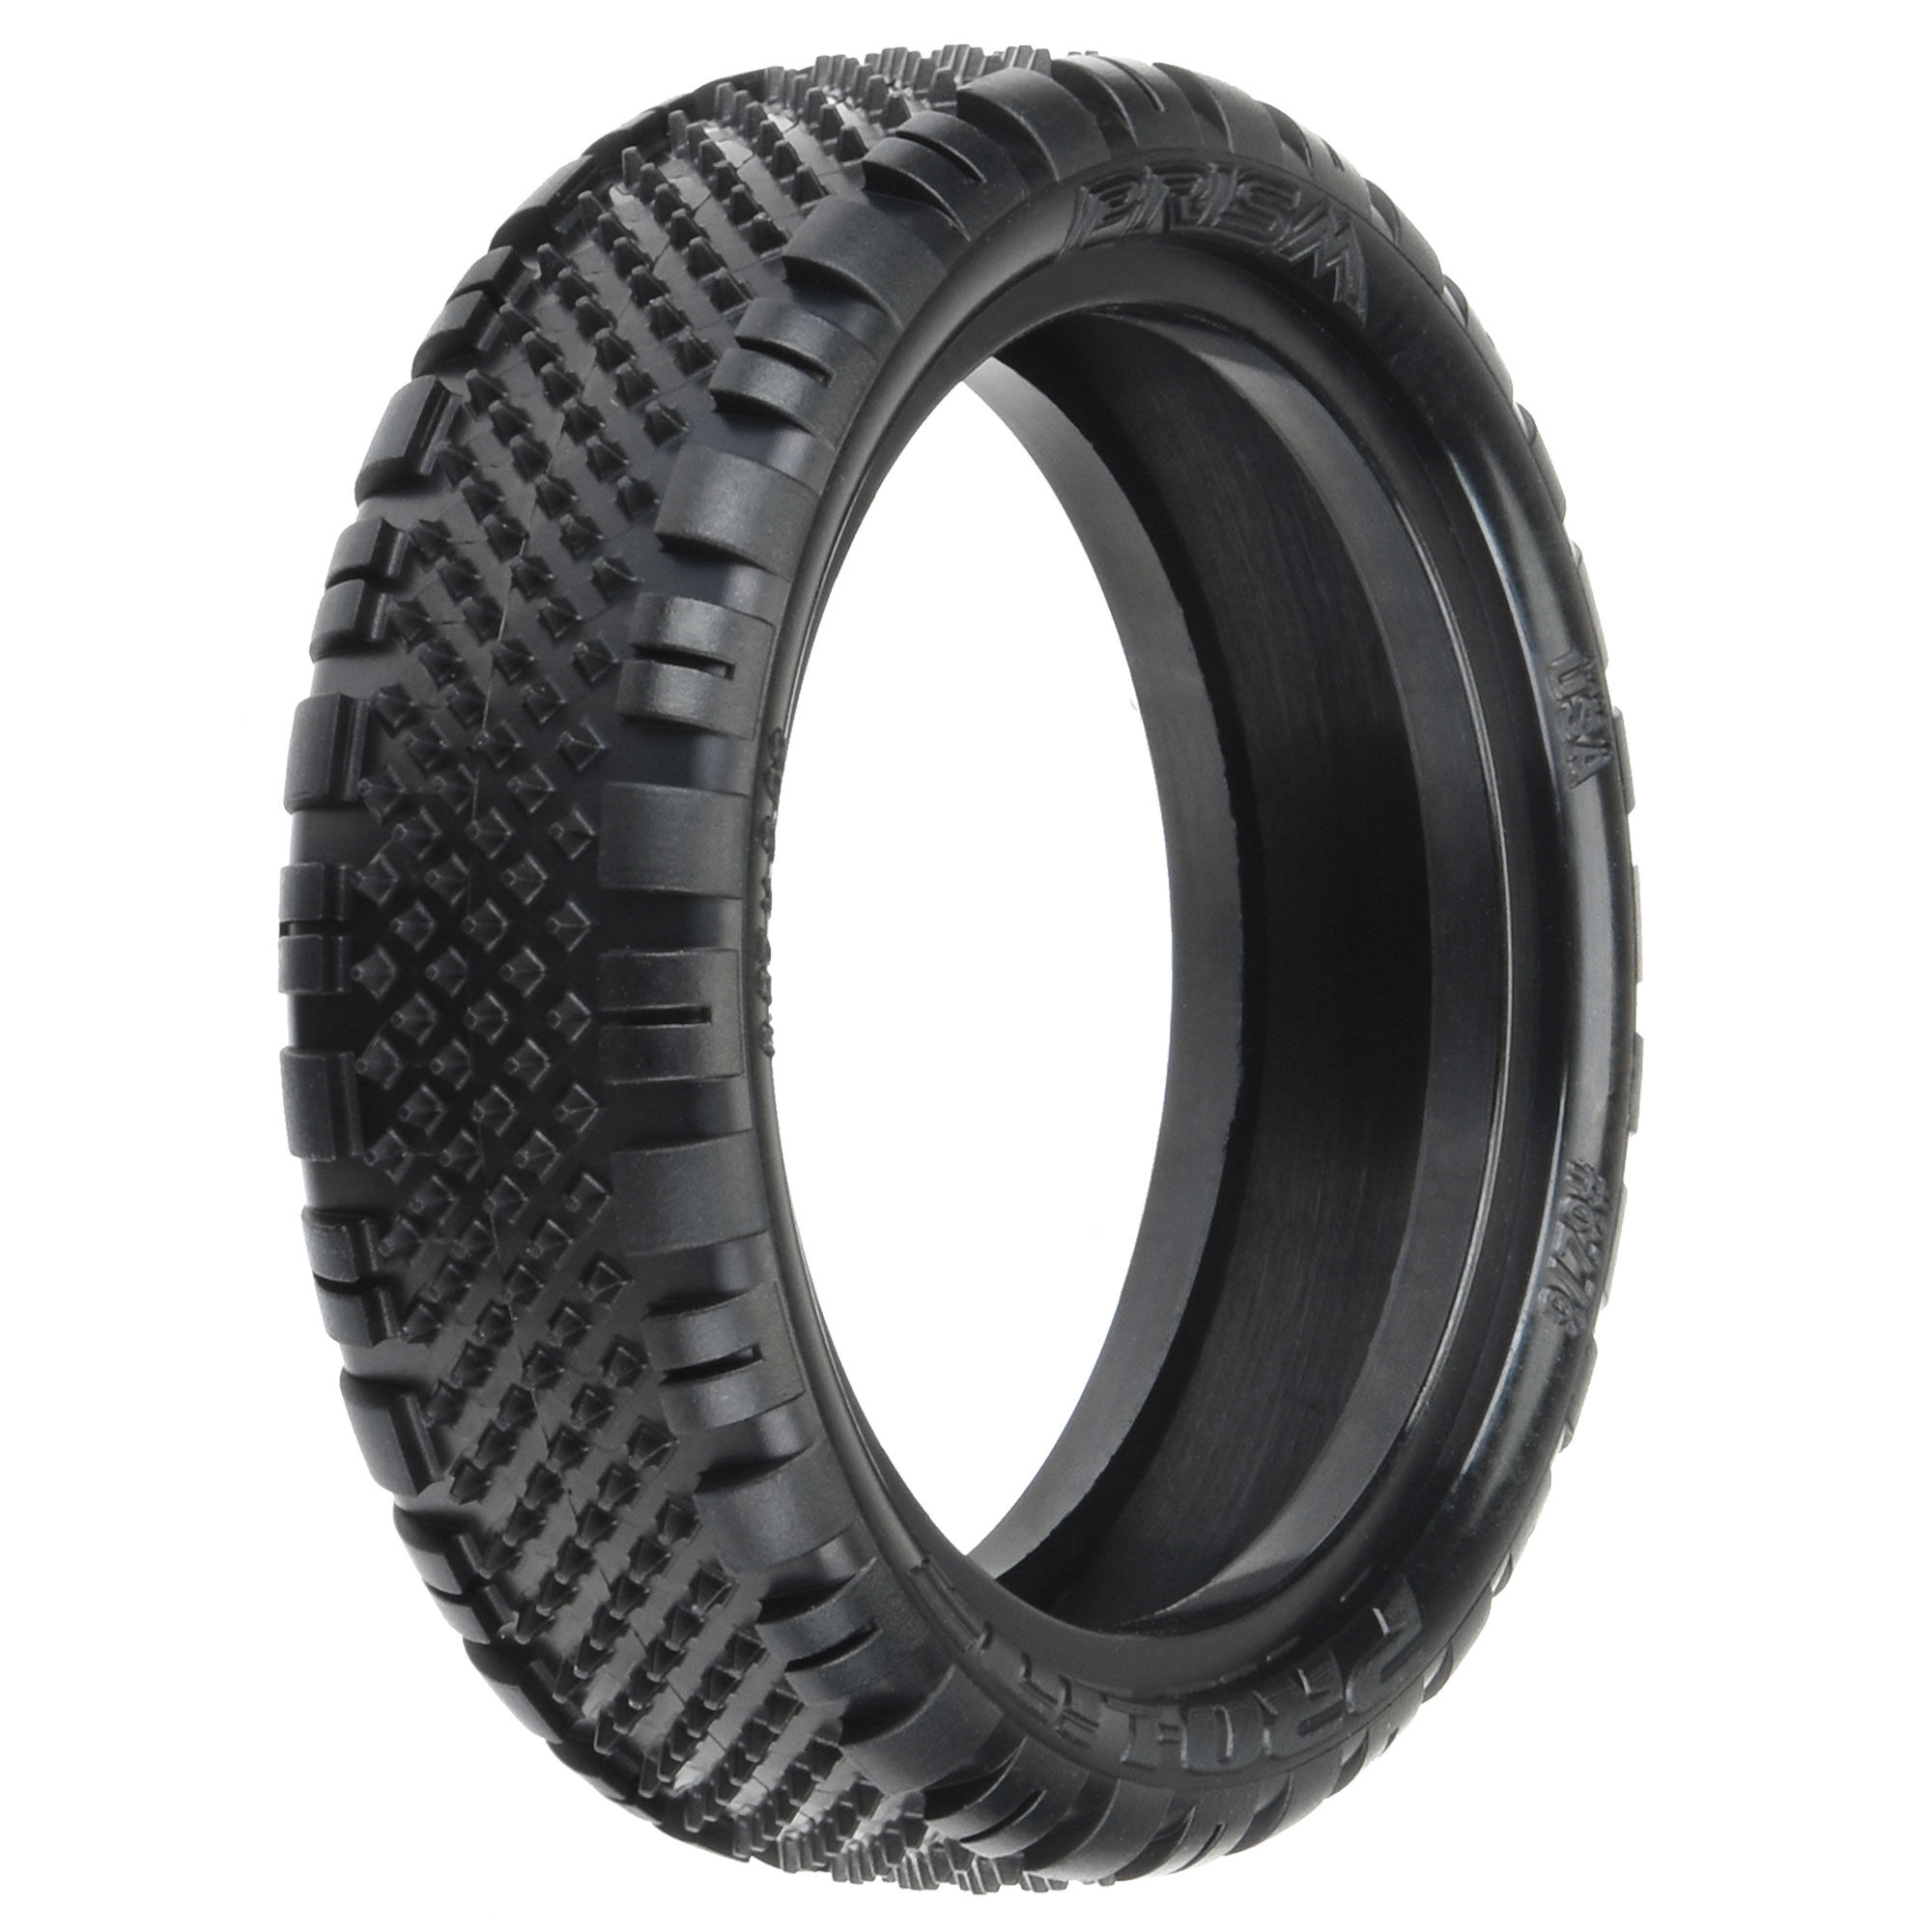 Pro-Line 8273-104 Pyramid Z4 2.2" 2WD Carpet Front Buggy Tires Buy 1 Get 1 Free! 